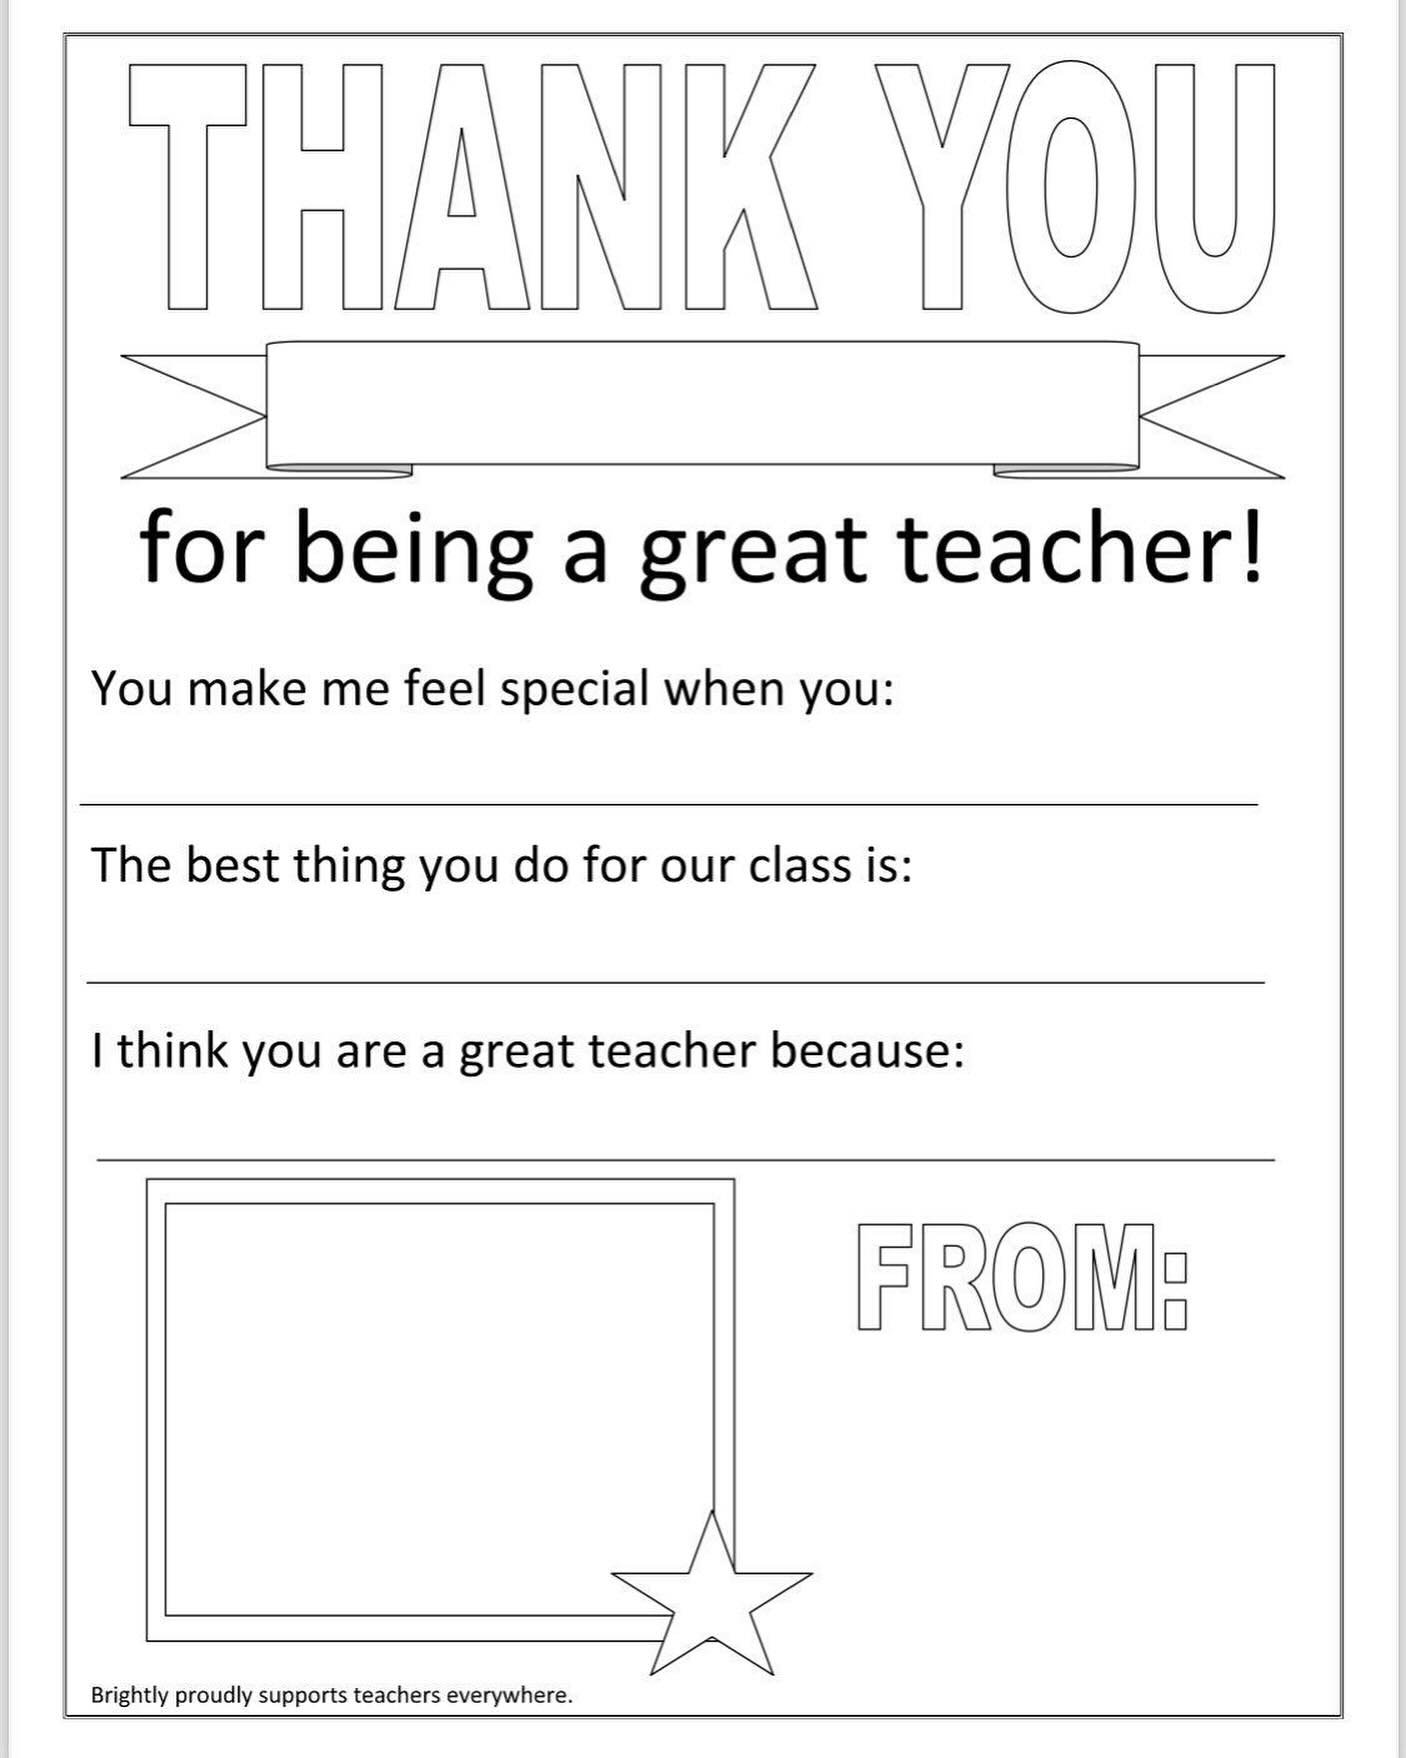 Don&rsquo;t forget to thank our very special teachers 🍎🍏
Happy Teachers Appreciation Week!